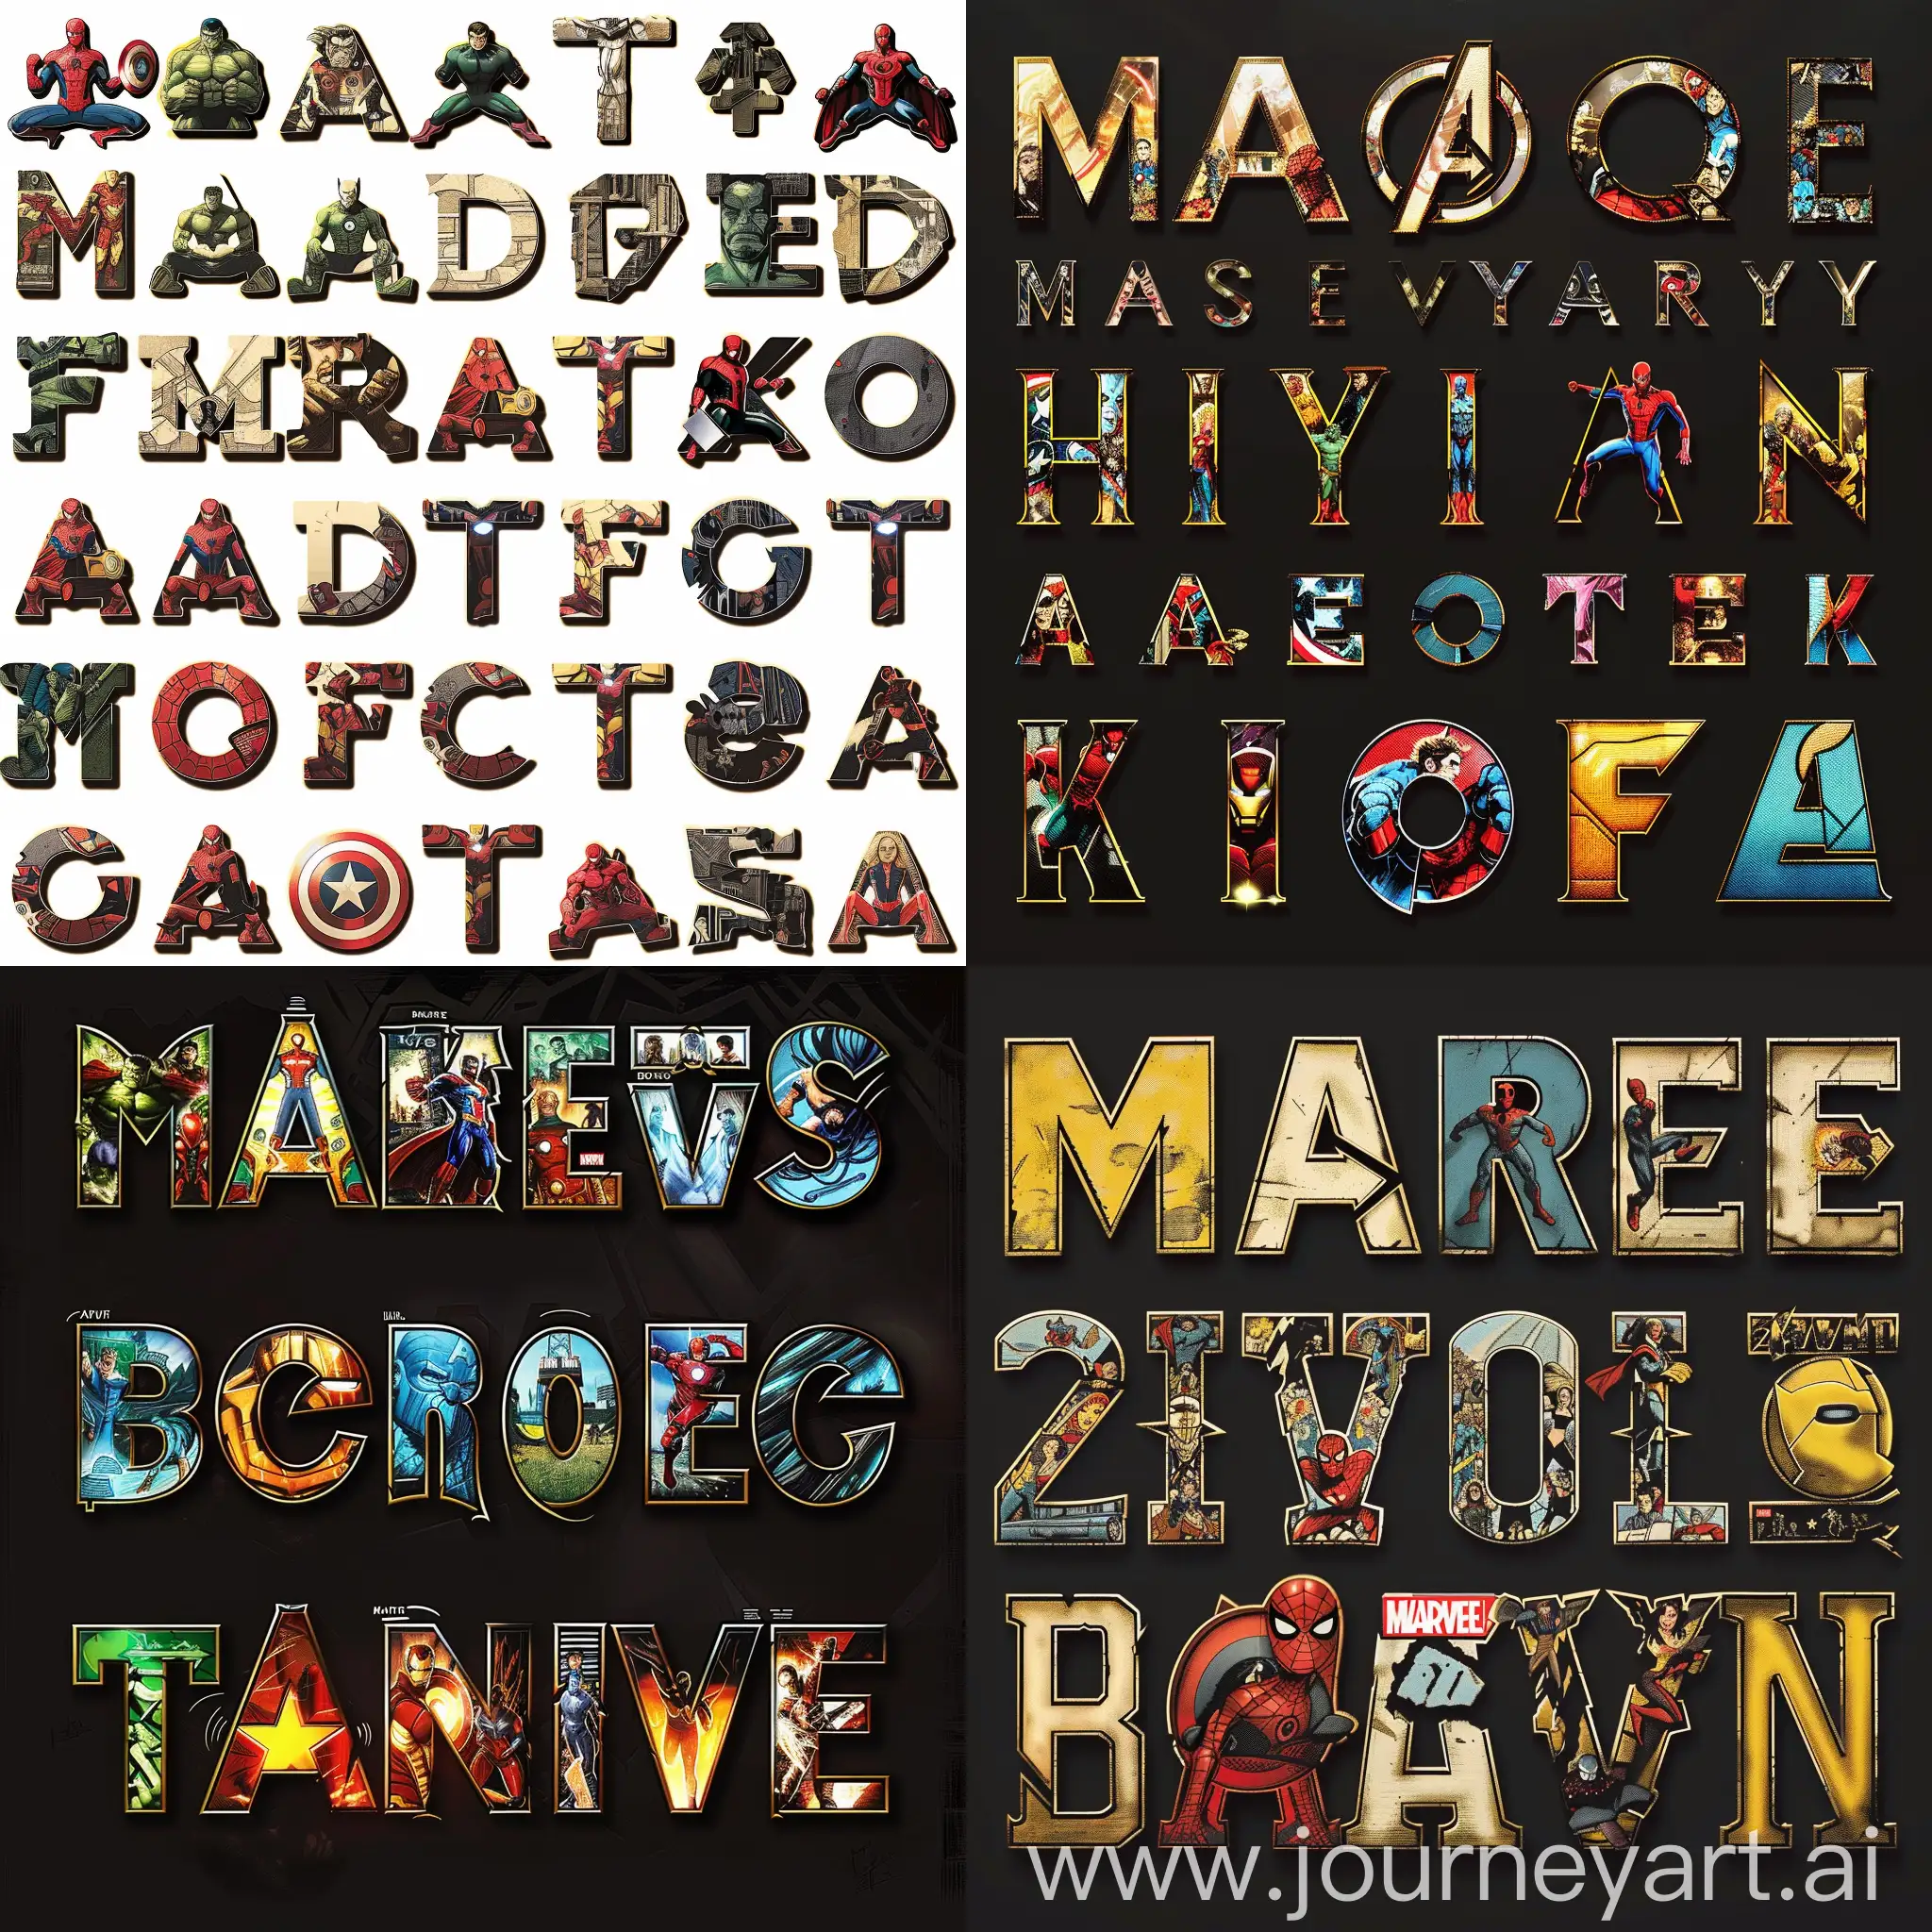 Marvel-Character-Images-in-Hieroglyphic-Fonts-Complete-Alphabet-Set